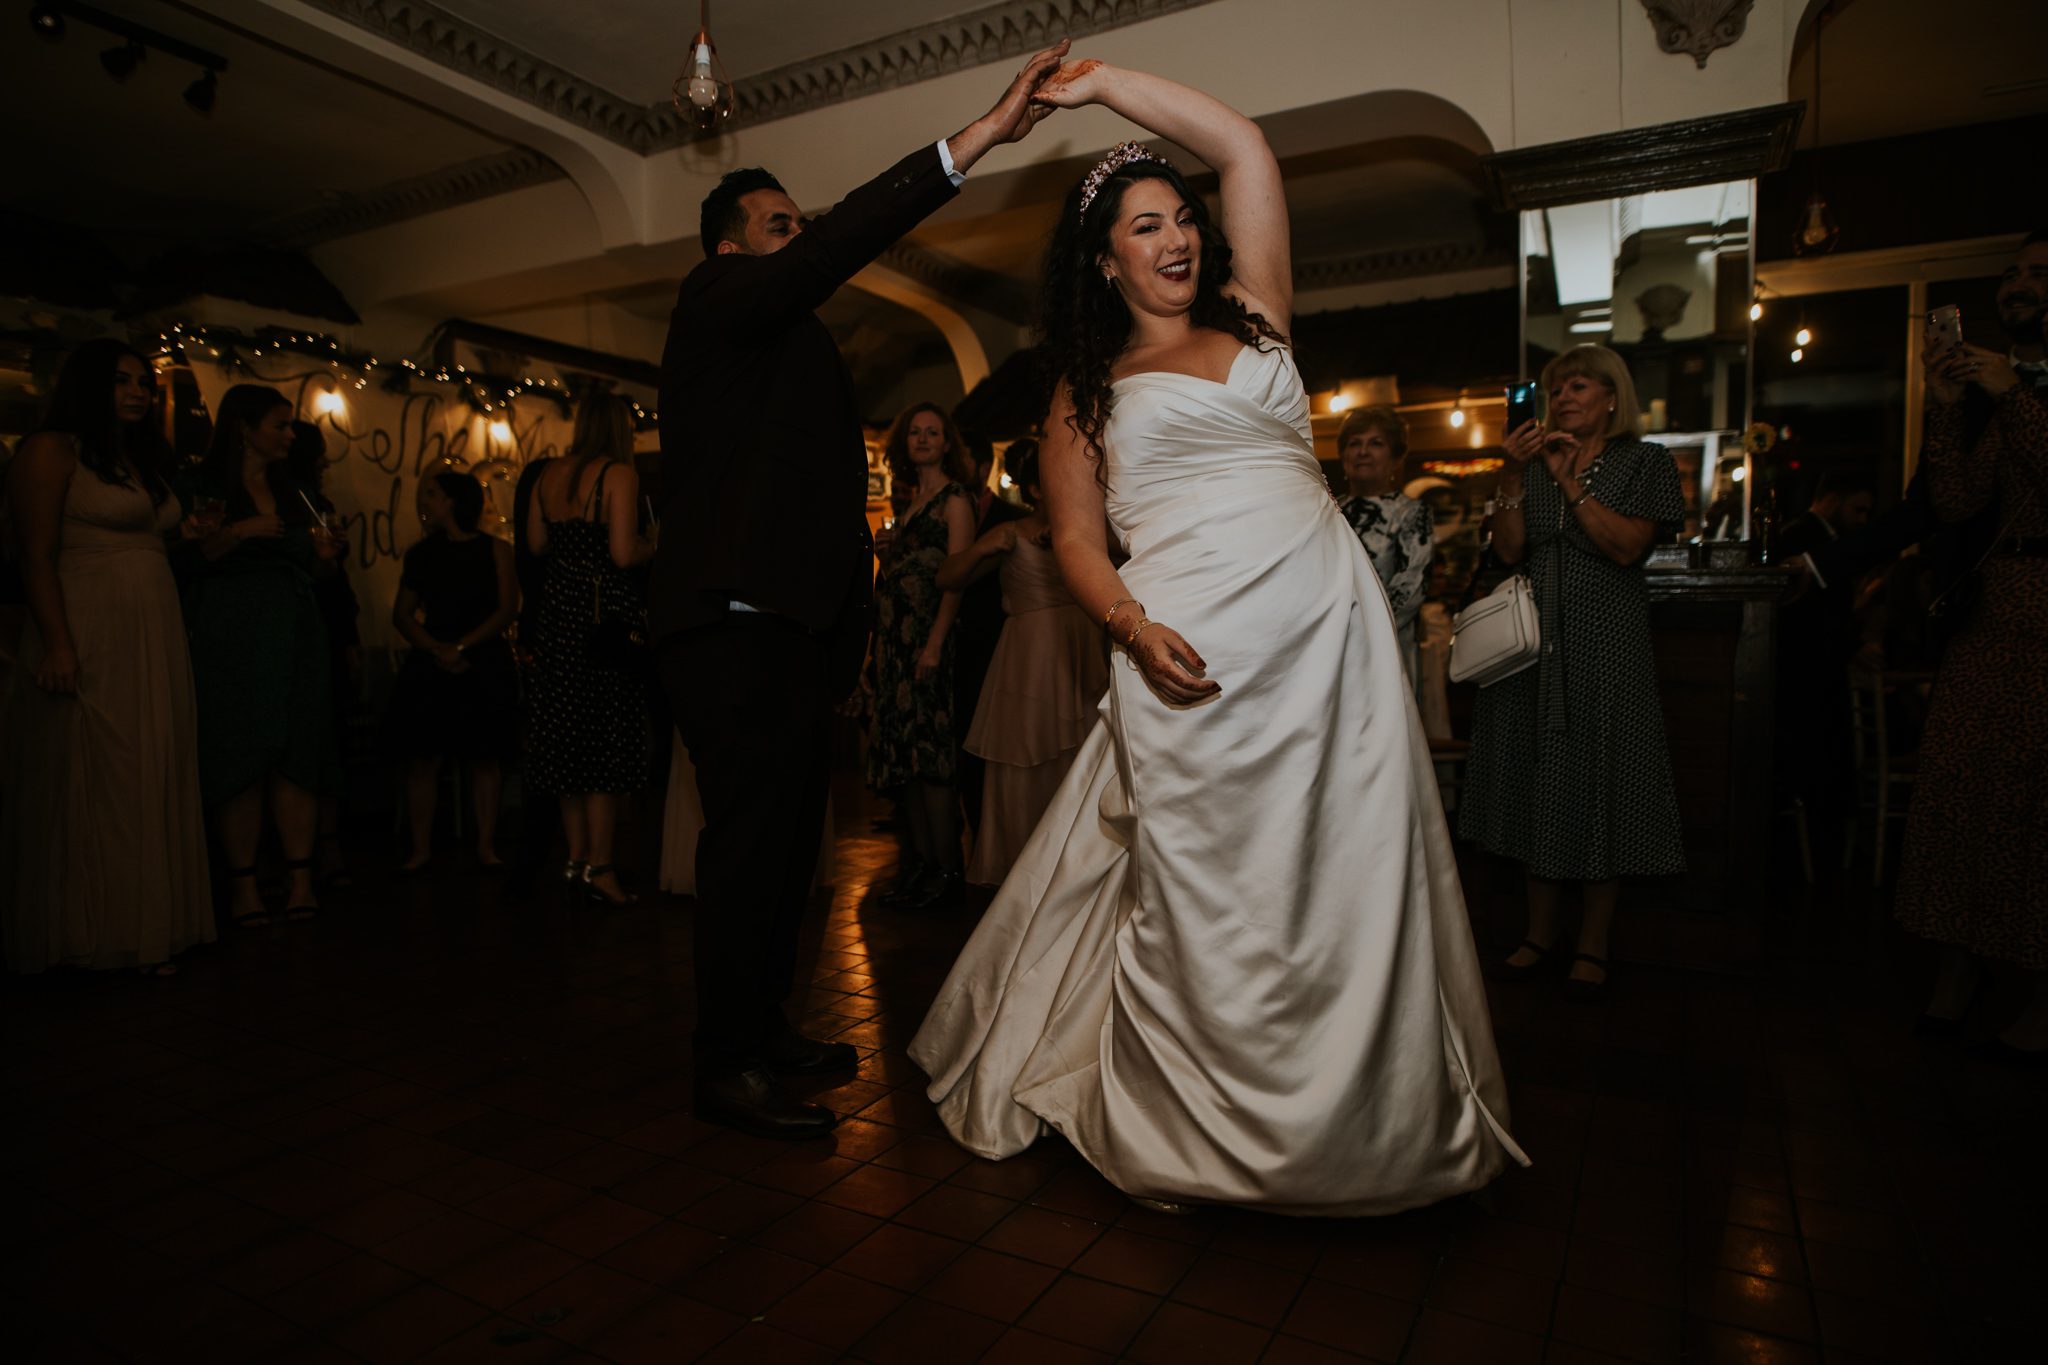 First dance as man and wife at PhoSmiths in London